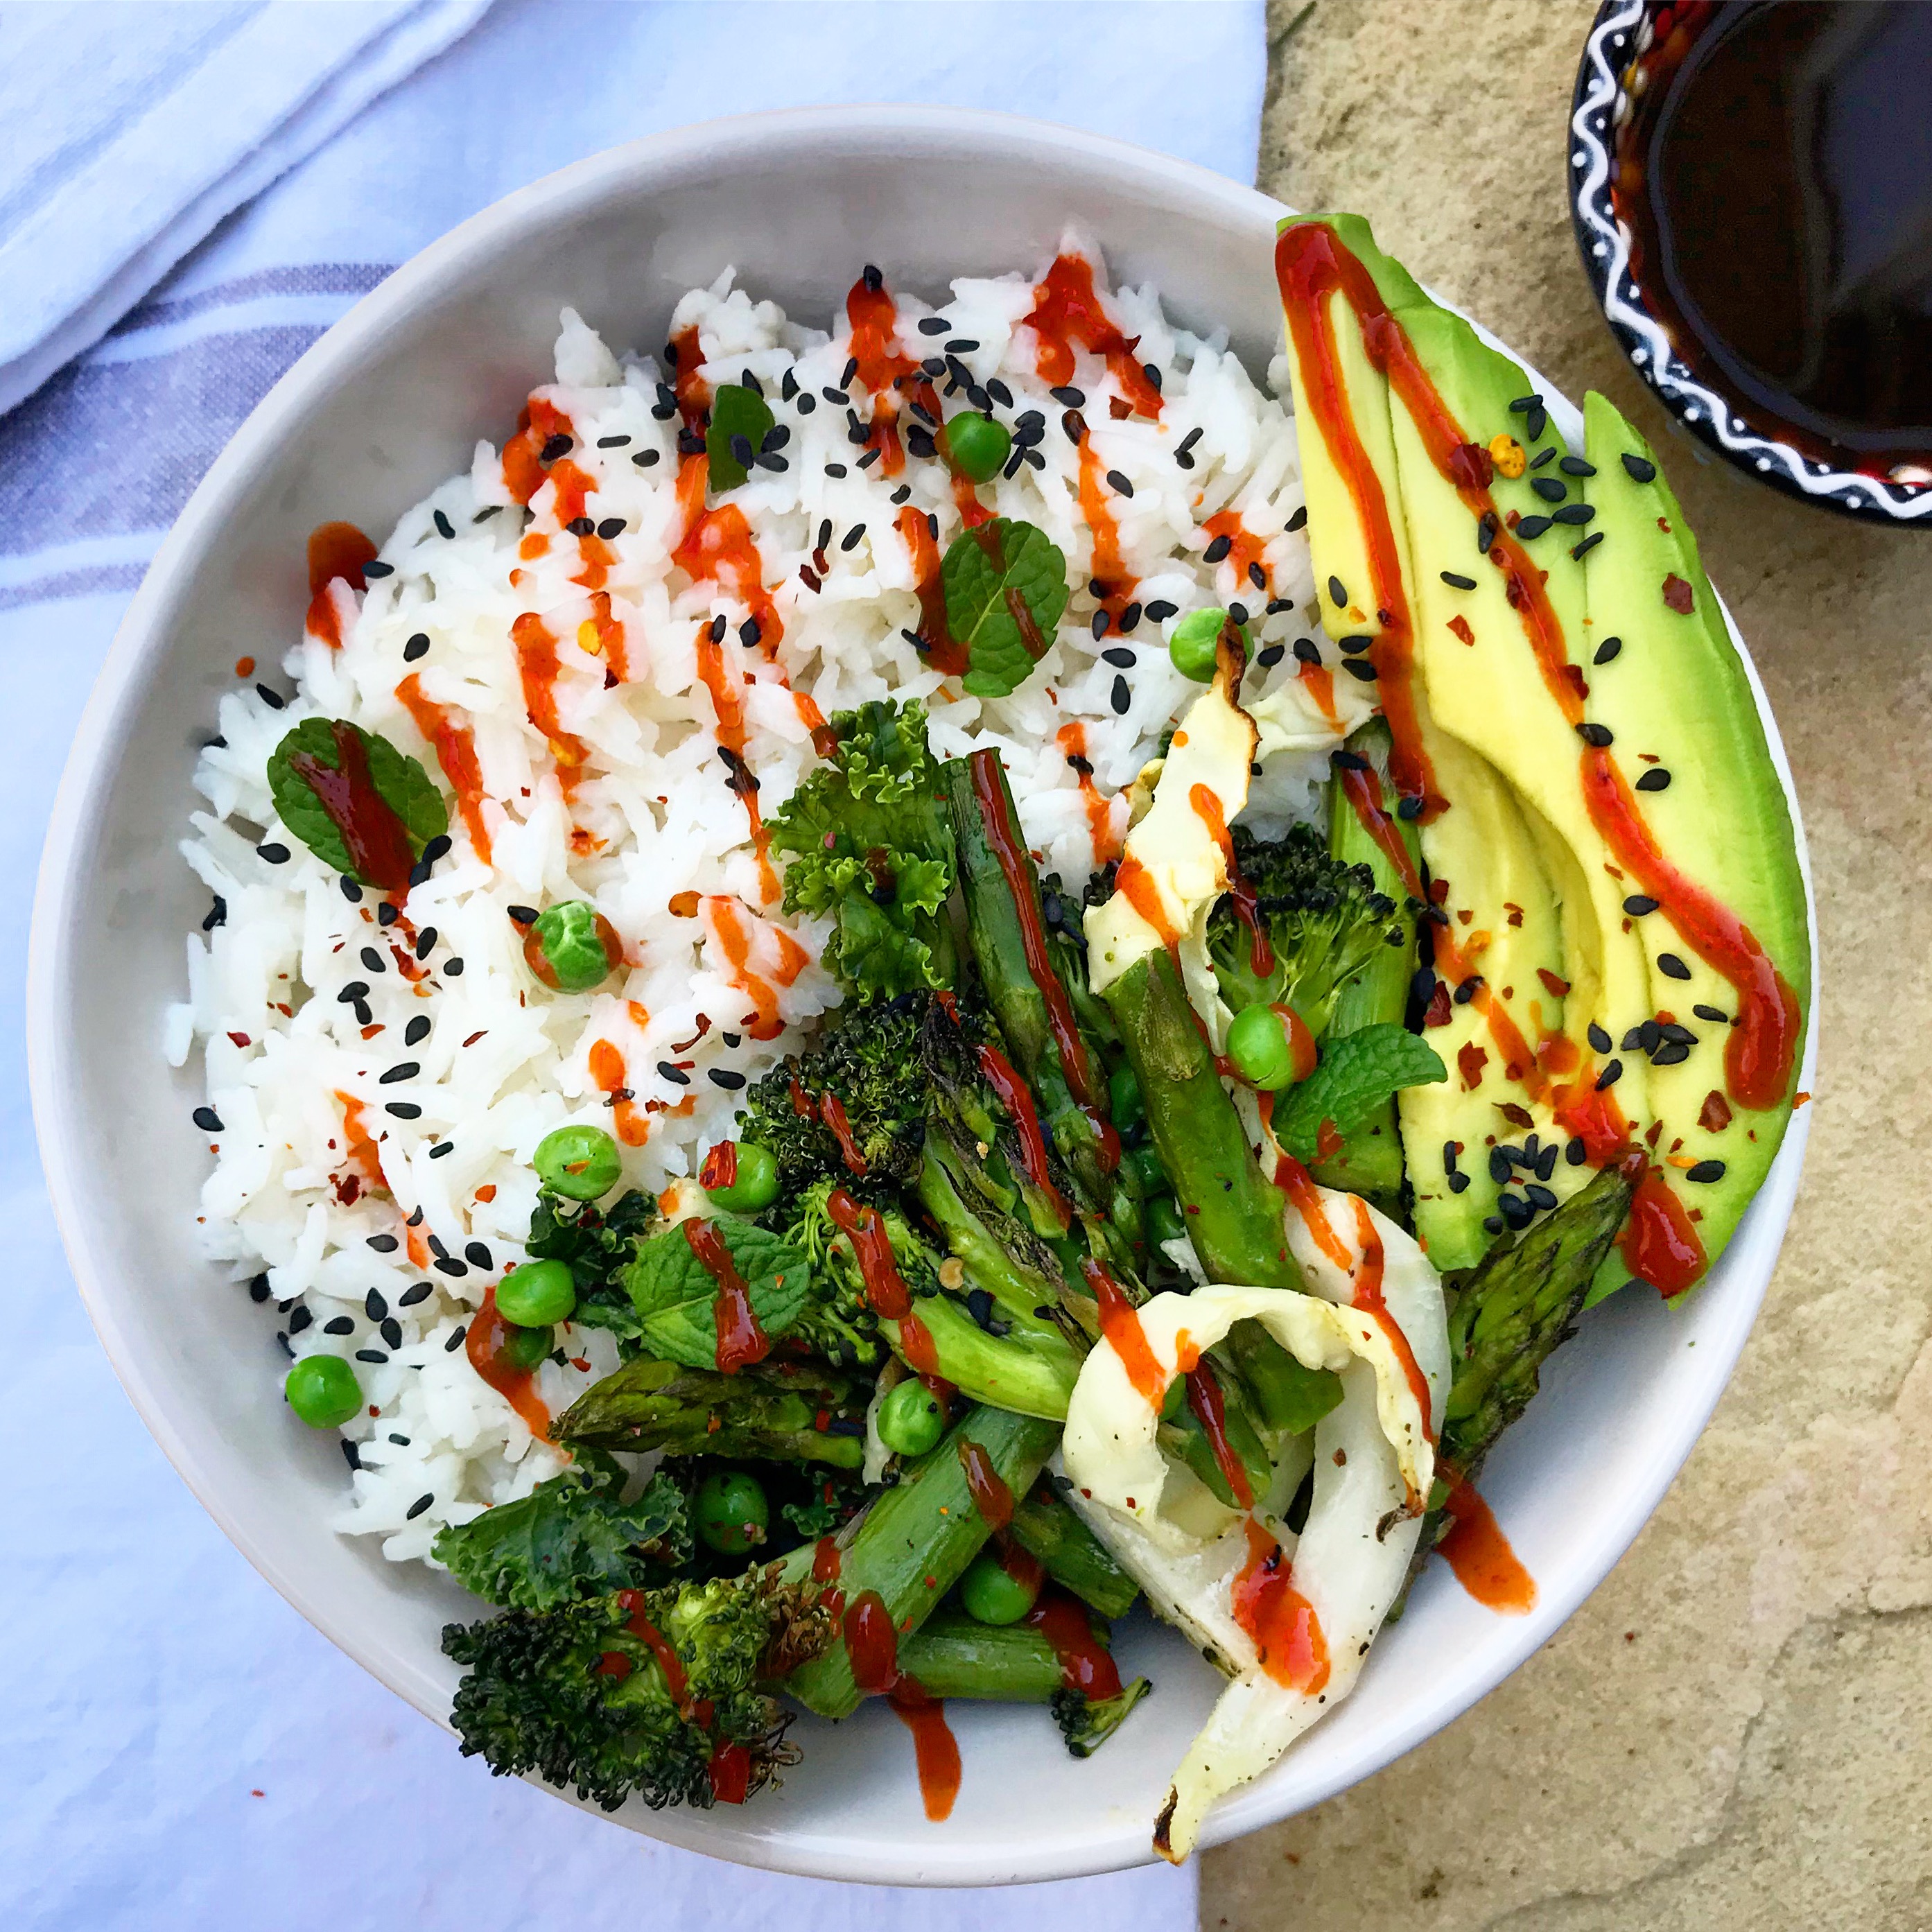 Coconut Rice w/ Greens and Spicy Sesame Sauce